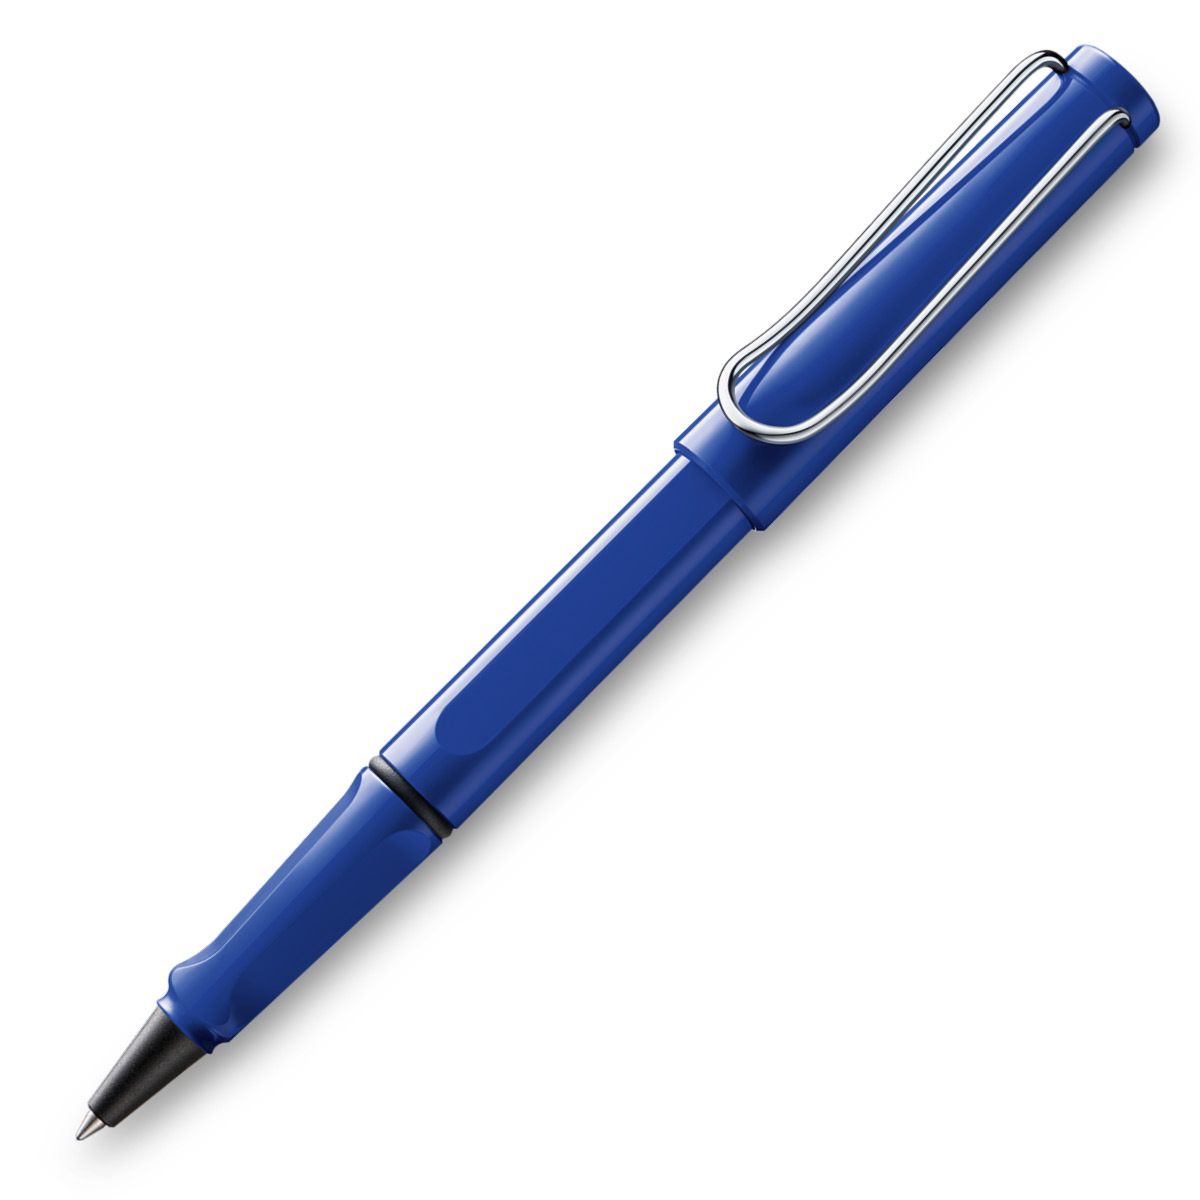 Safari Rollerball Shiny blue in the group Pens / Fine Writing / Rollerball Pens at Pen Store (101919)